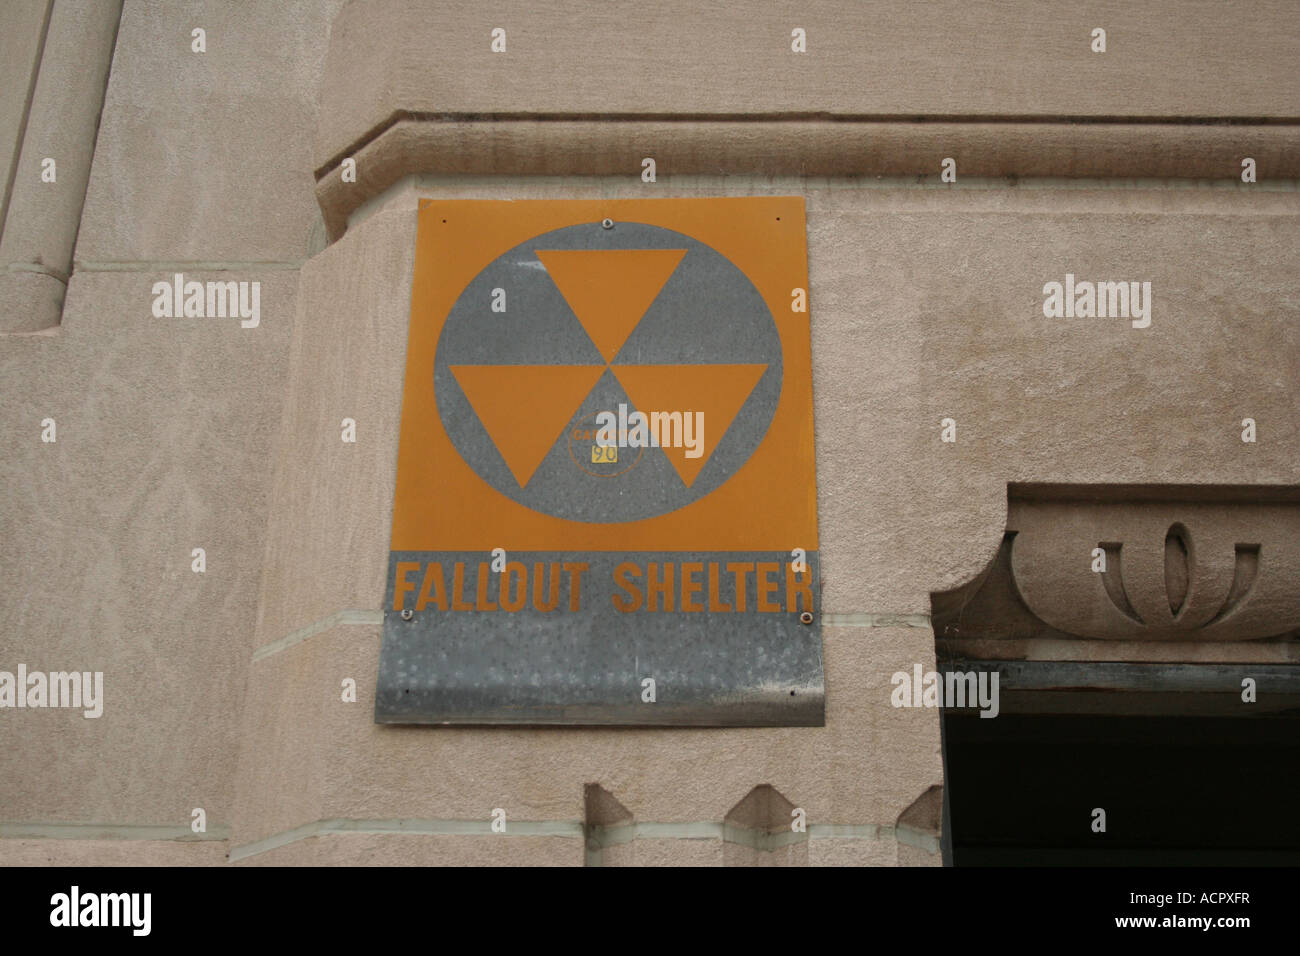 A fallout shelter sign Stock Photo